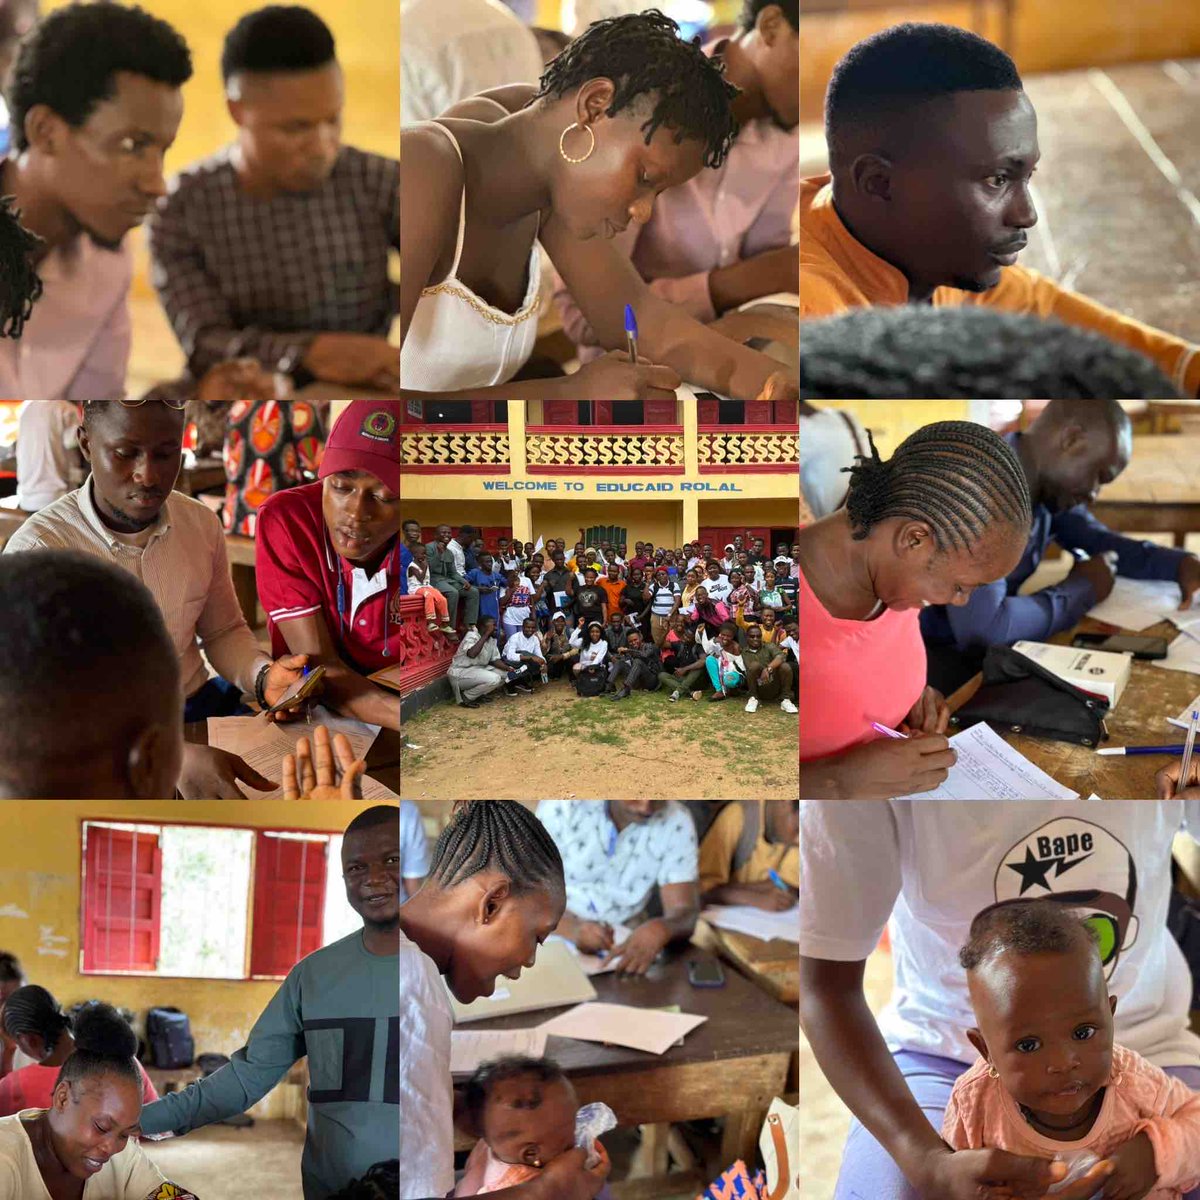 What a gr8 day: 70+ youngsters spent the day at an #EducAid #EmployabilitySkills #Outreach event, working on CVs & building a skills market-place. This is how we build a country: skills, values, independence & collaboration #EducationInSierraLeone #EducAidFamily 💪🏼🇸🇱📚